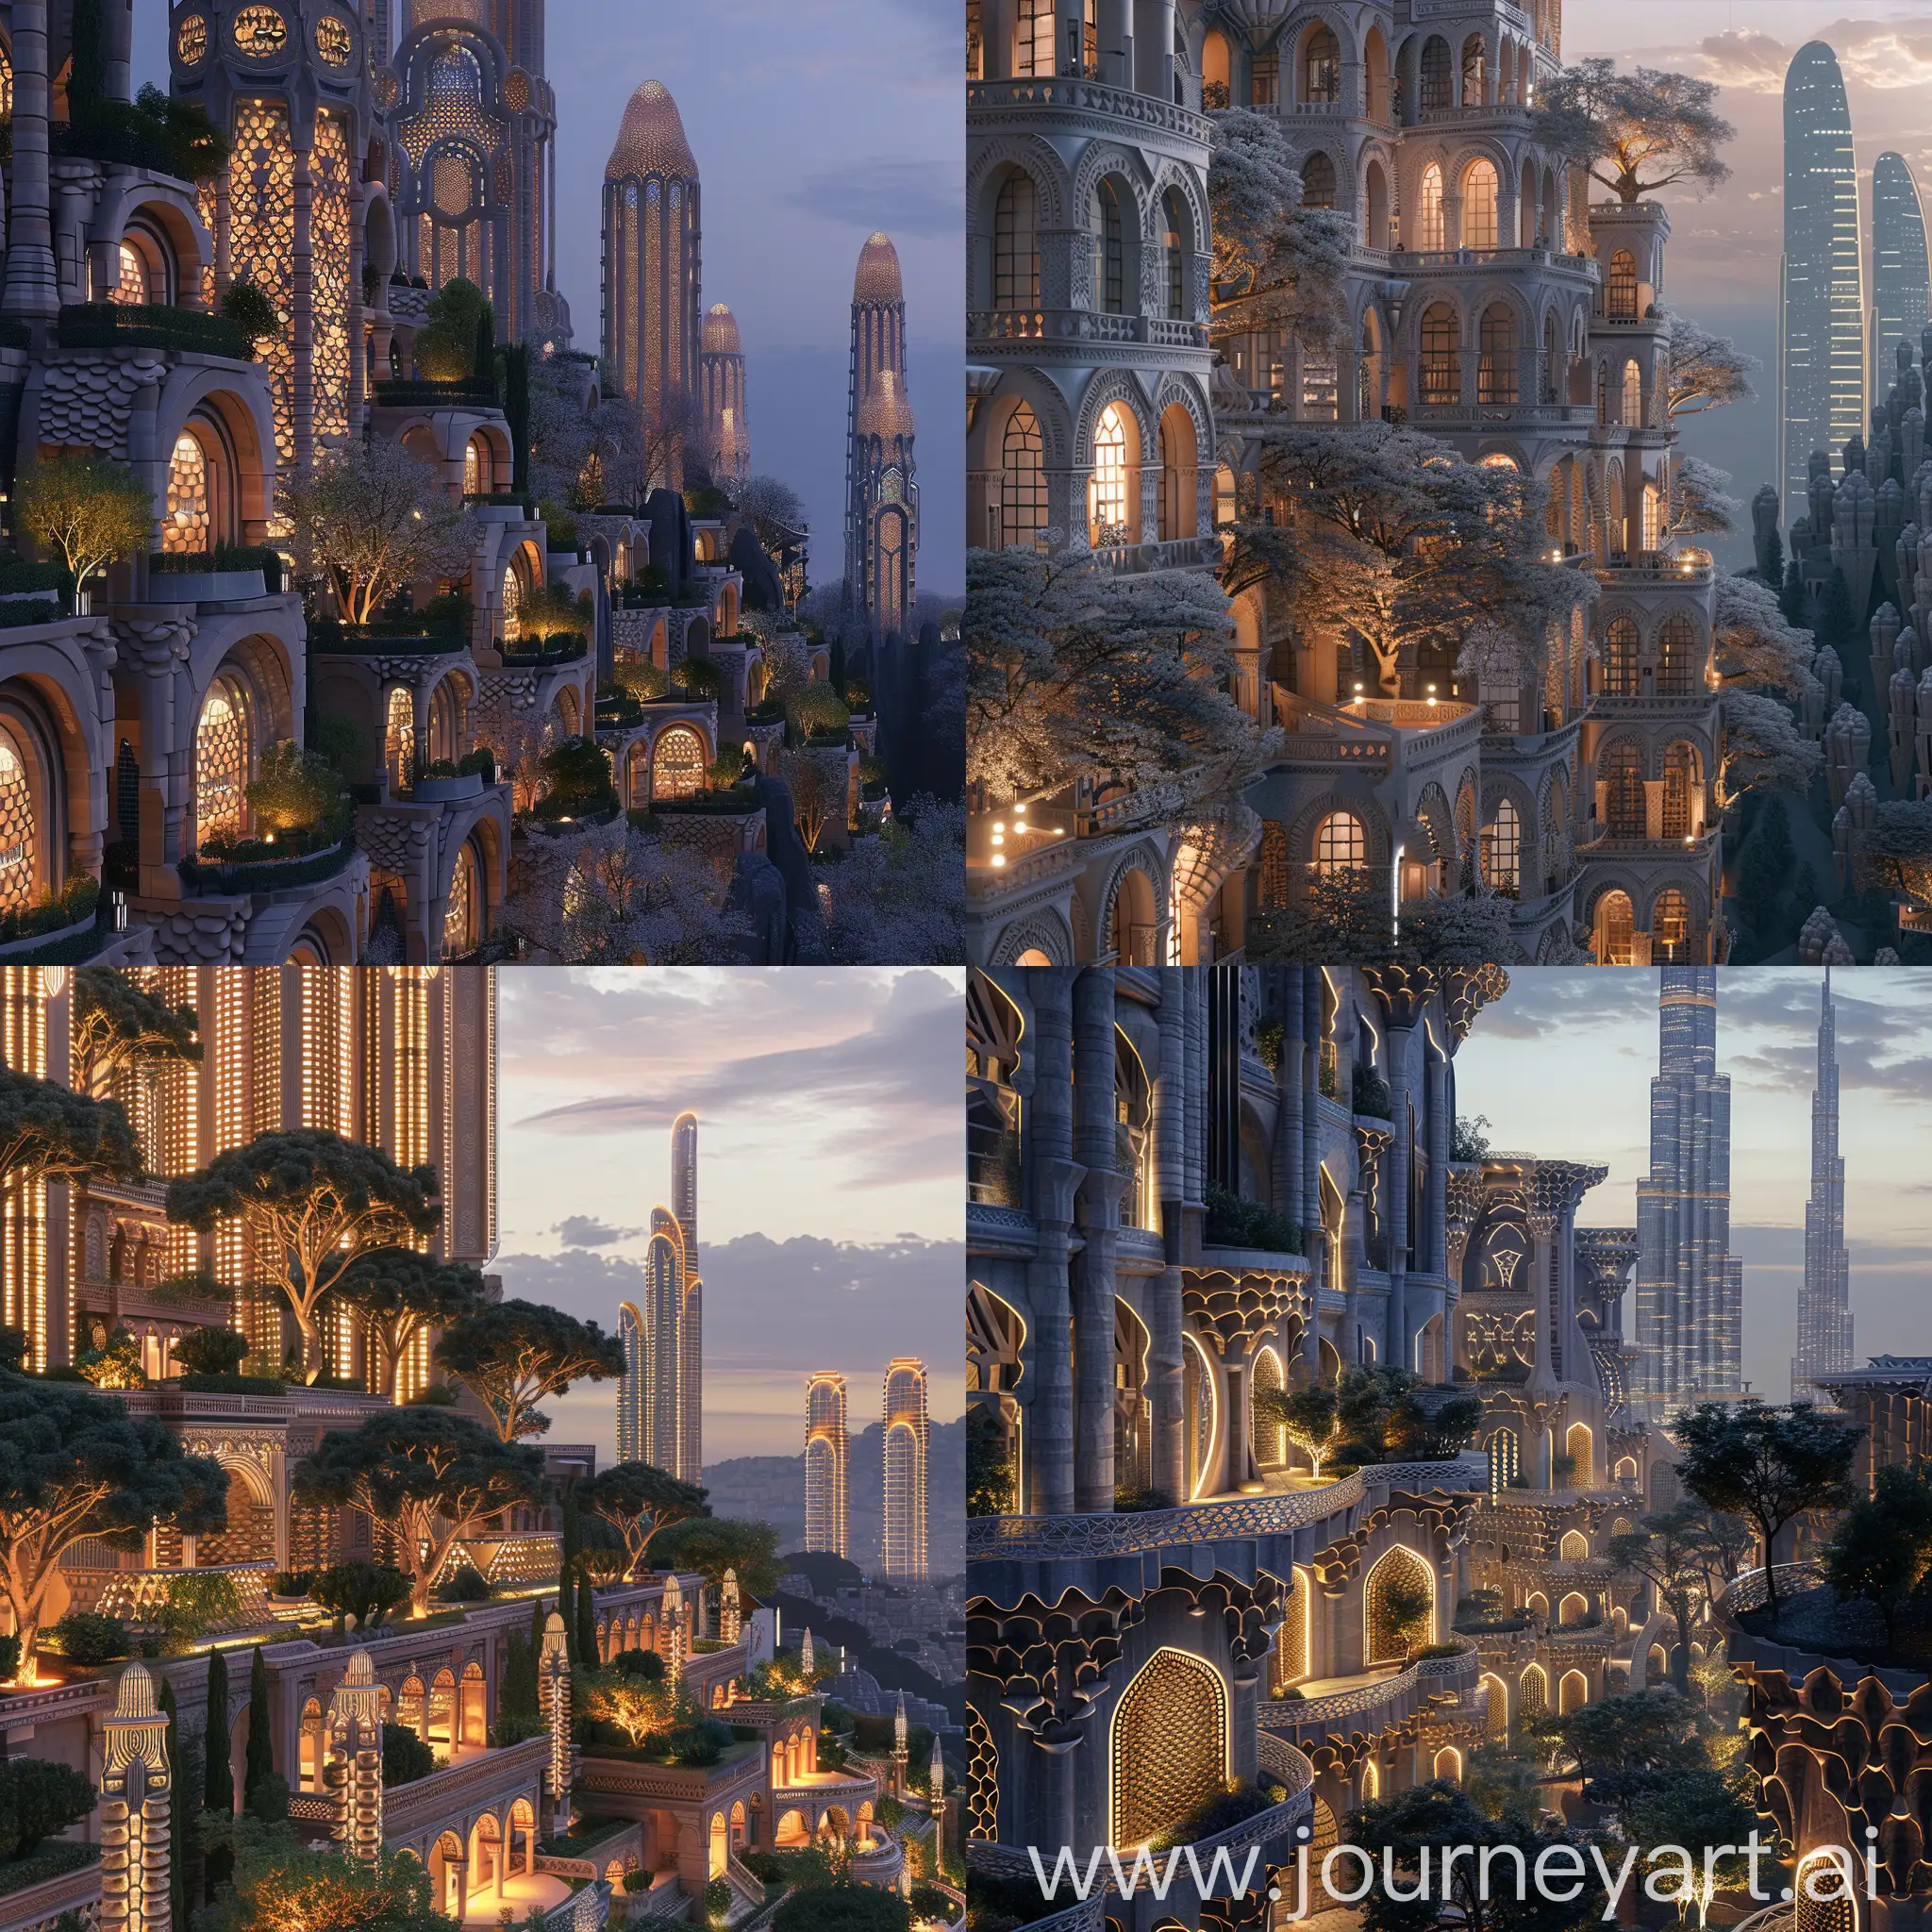 Beautiful futuristic metropolis in an alternate timeline where all buildings retain traditional elements, ornate architecture with scale-like patterns on facades and illuminated trees, terraced supertall travertine skyscrapers in distance, spring, photograph